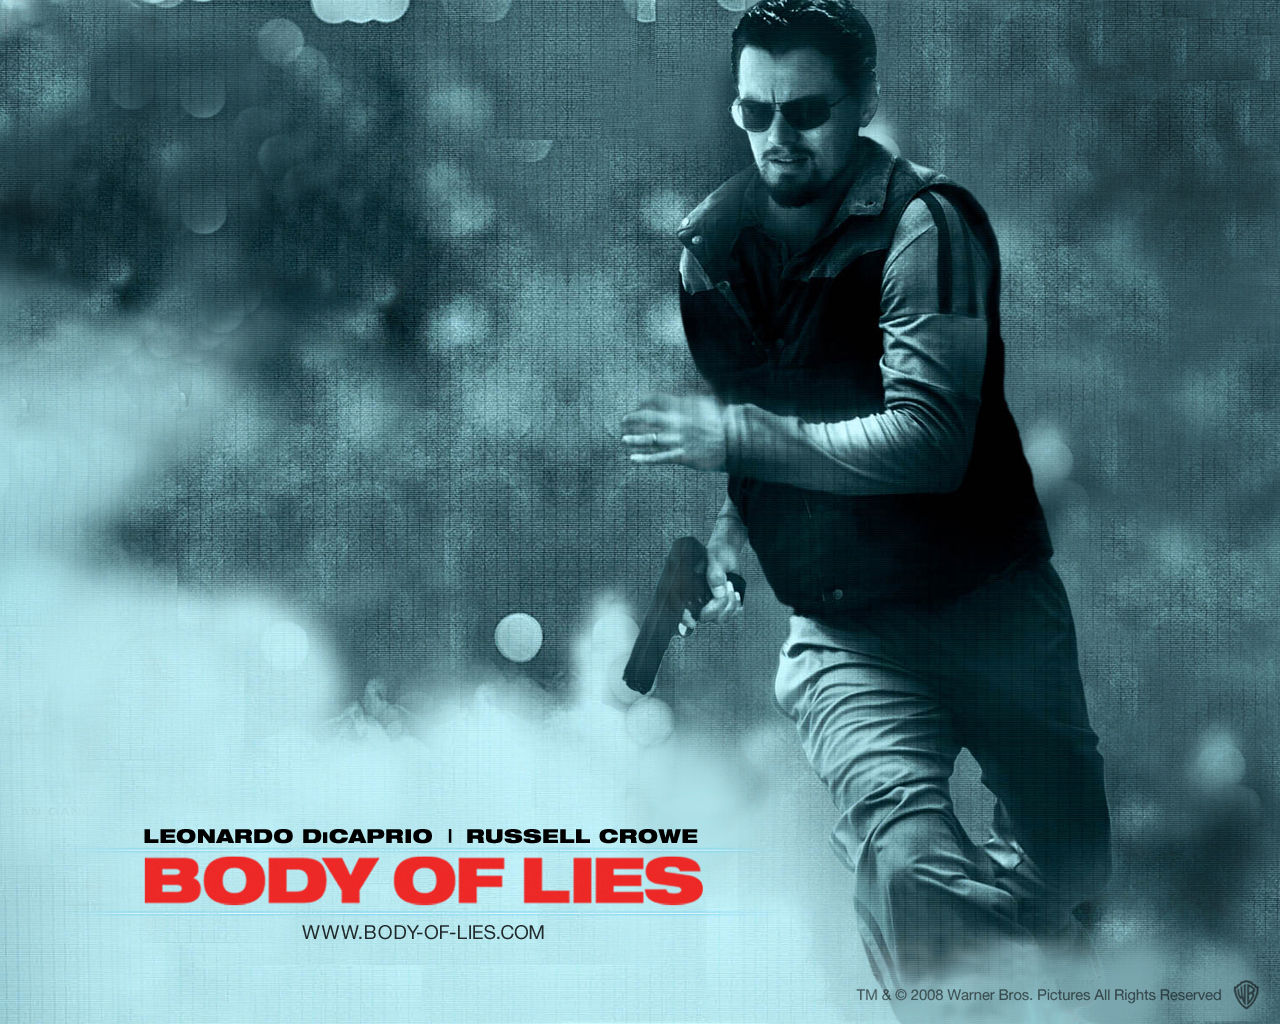 what was the point of body of lies movie